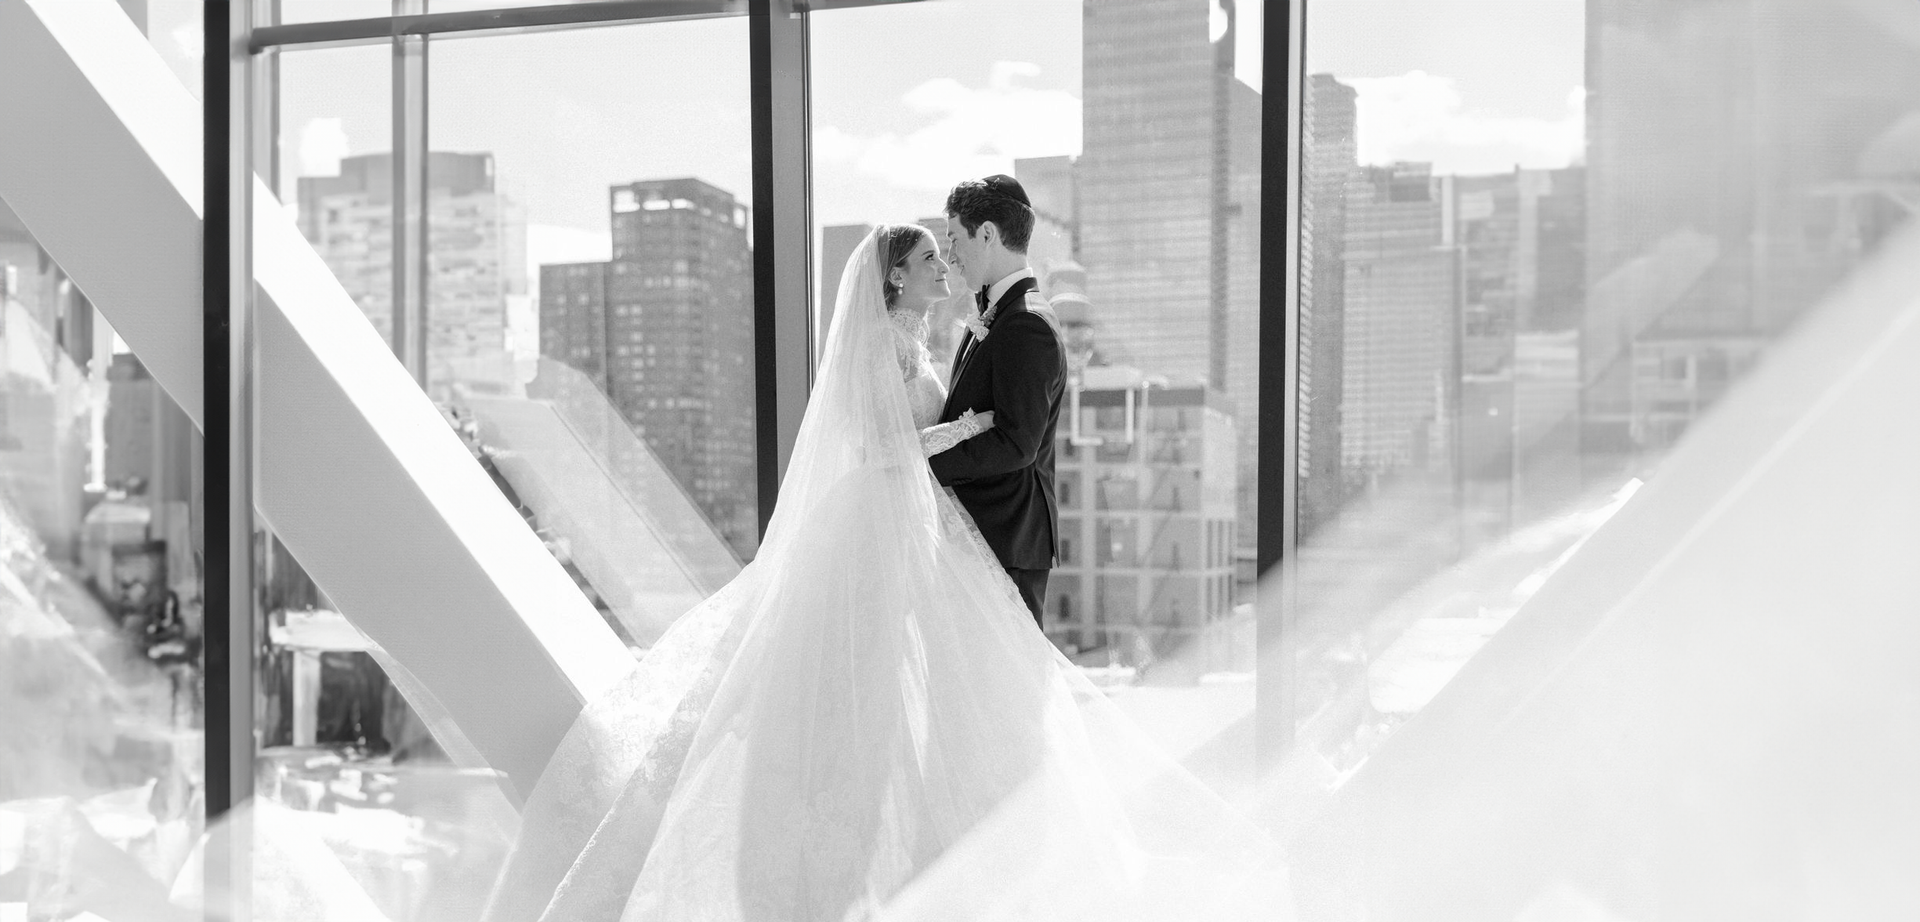 A bride and groom are kissing in front of a large window.